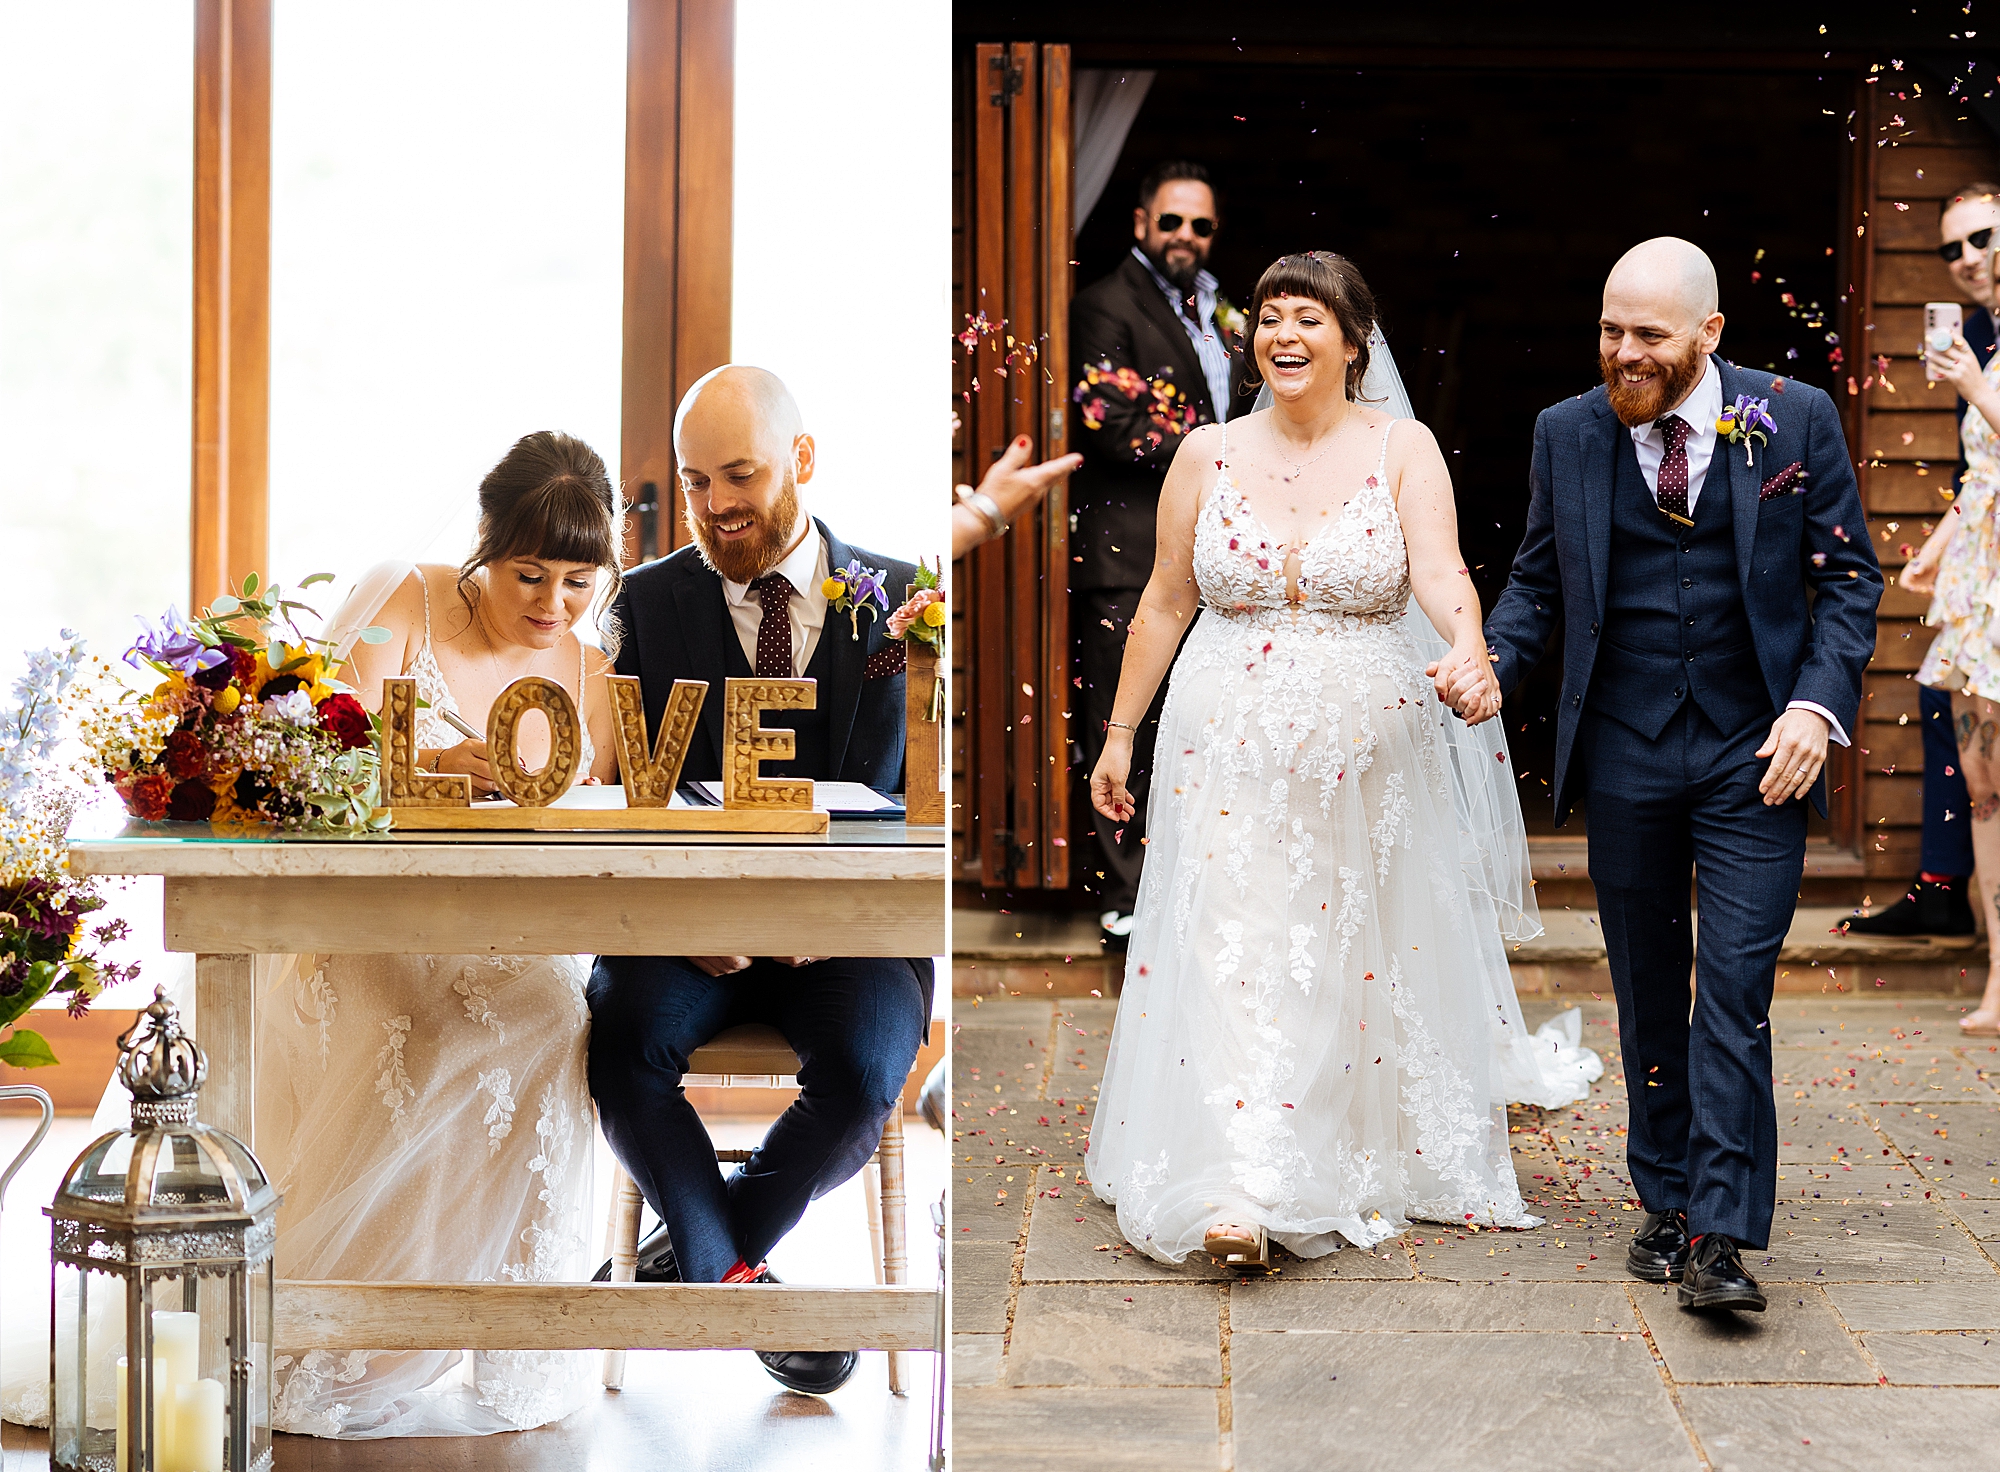 A contemporary wedding nestled in the countryside